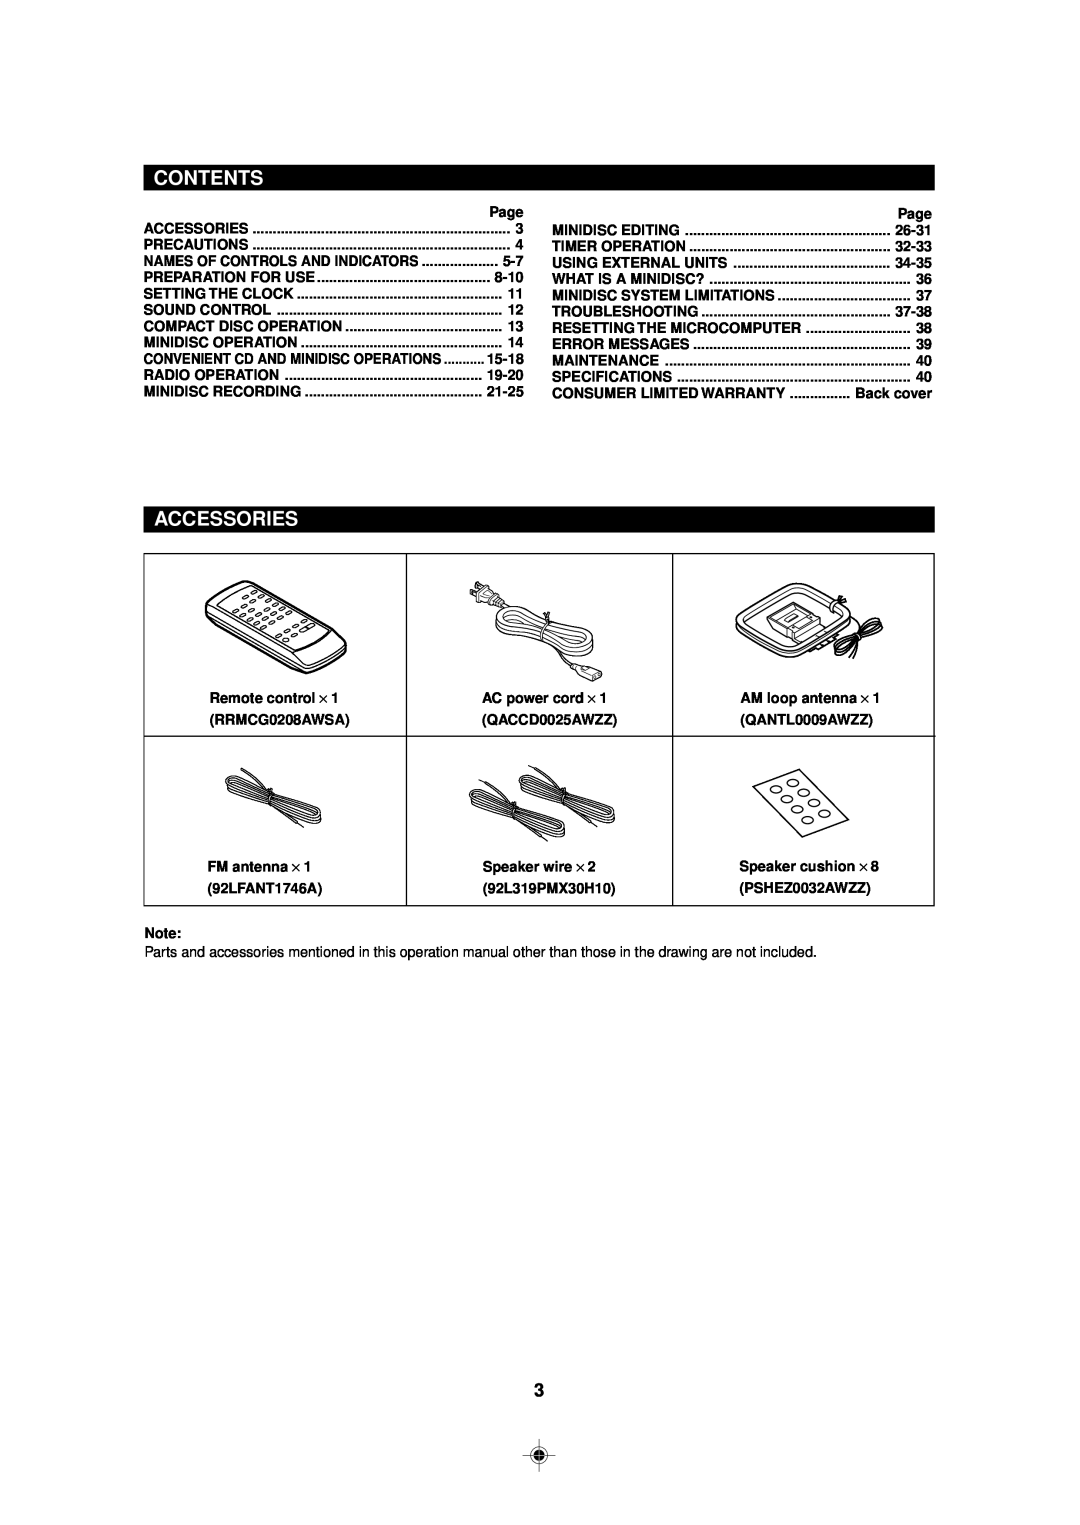 Sharp MD-MX30 operation manual Contents, Accessories 